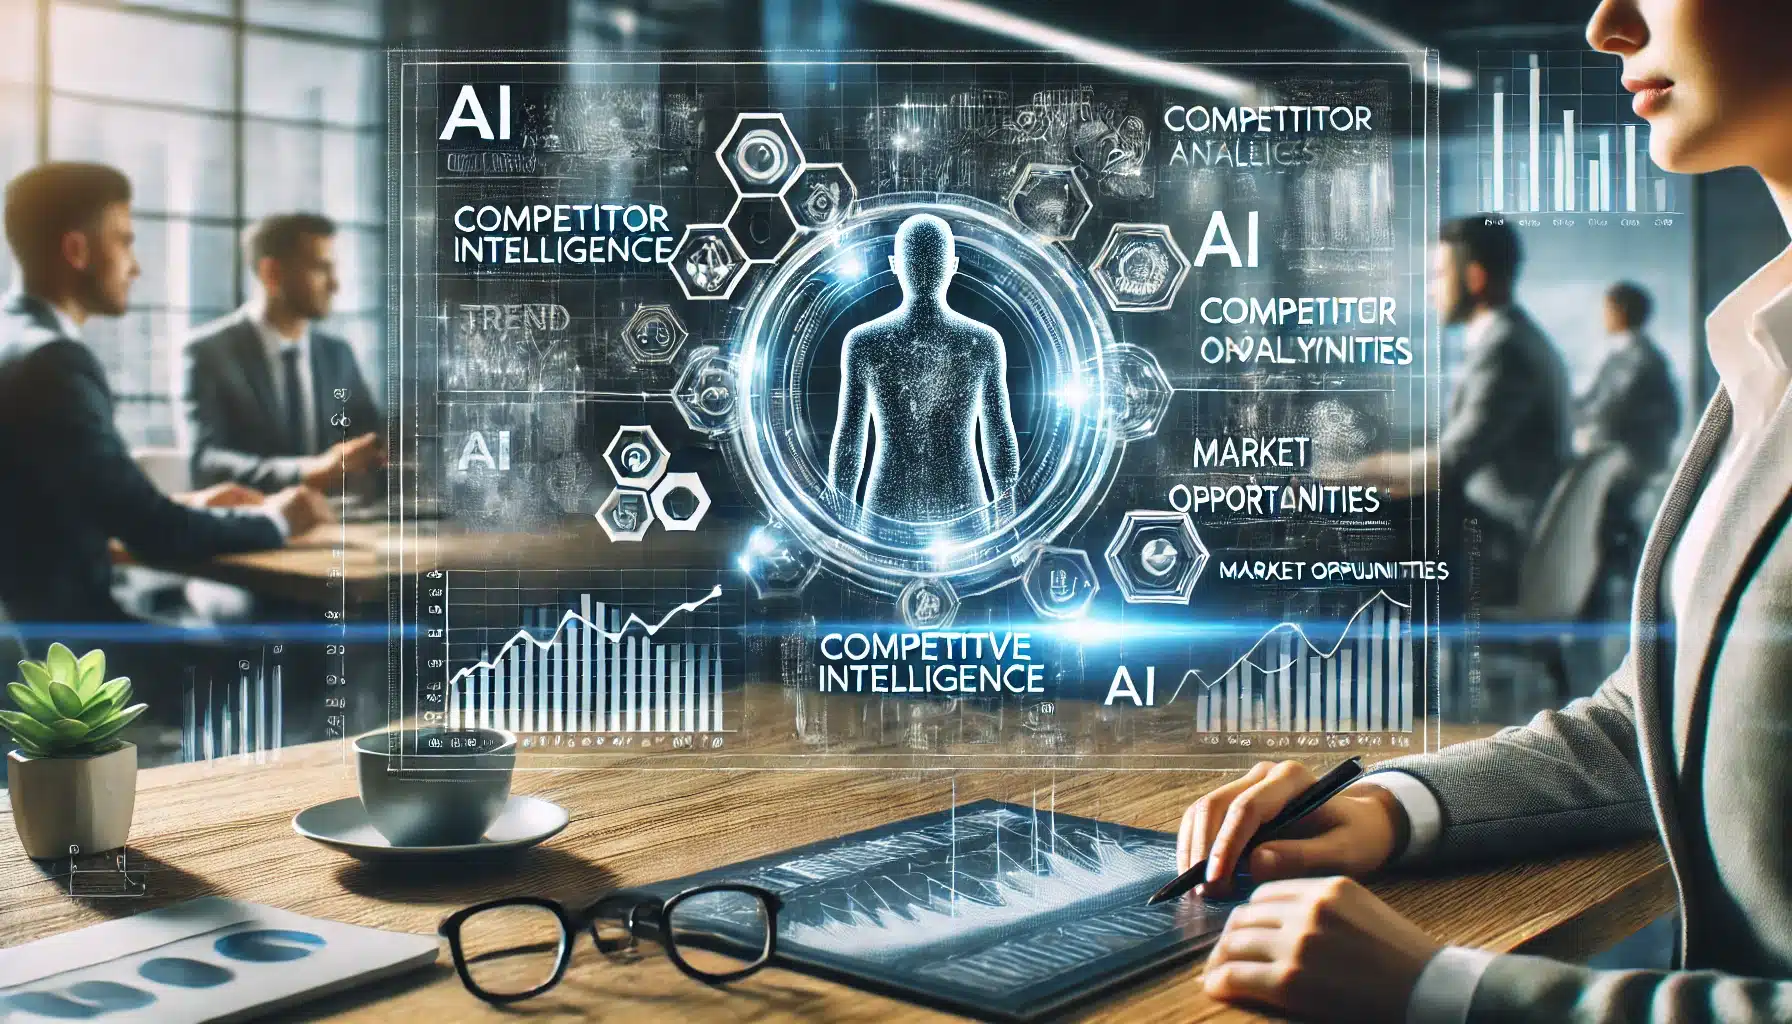 A modern and dynamic scene depicting AI-driven competitive intelligence and market research.